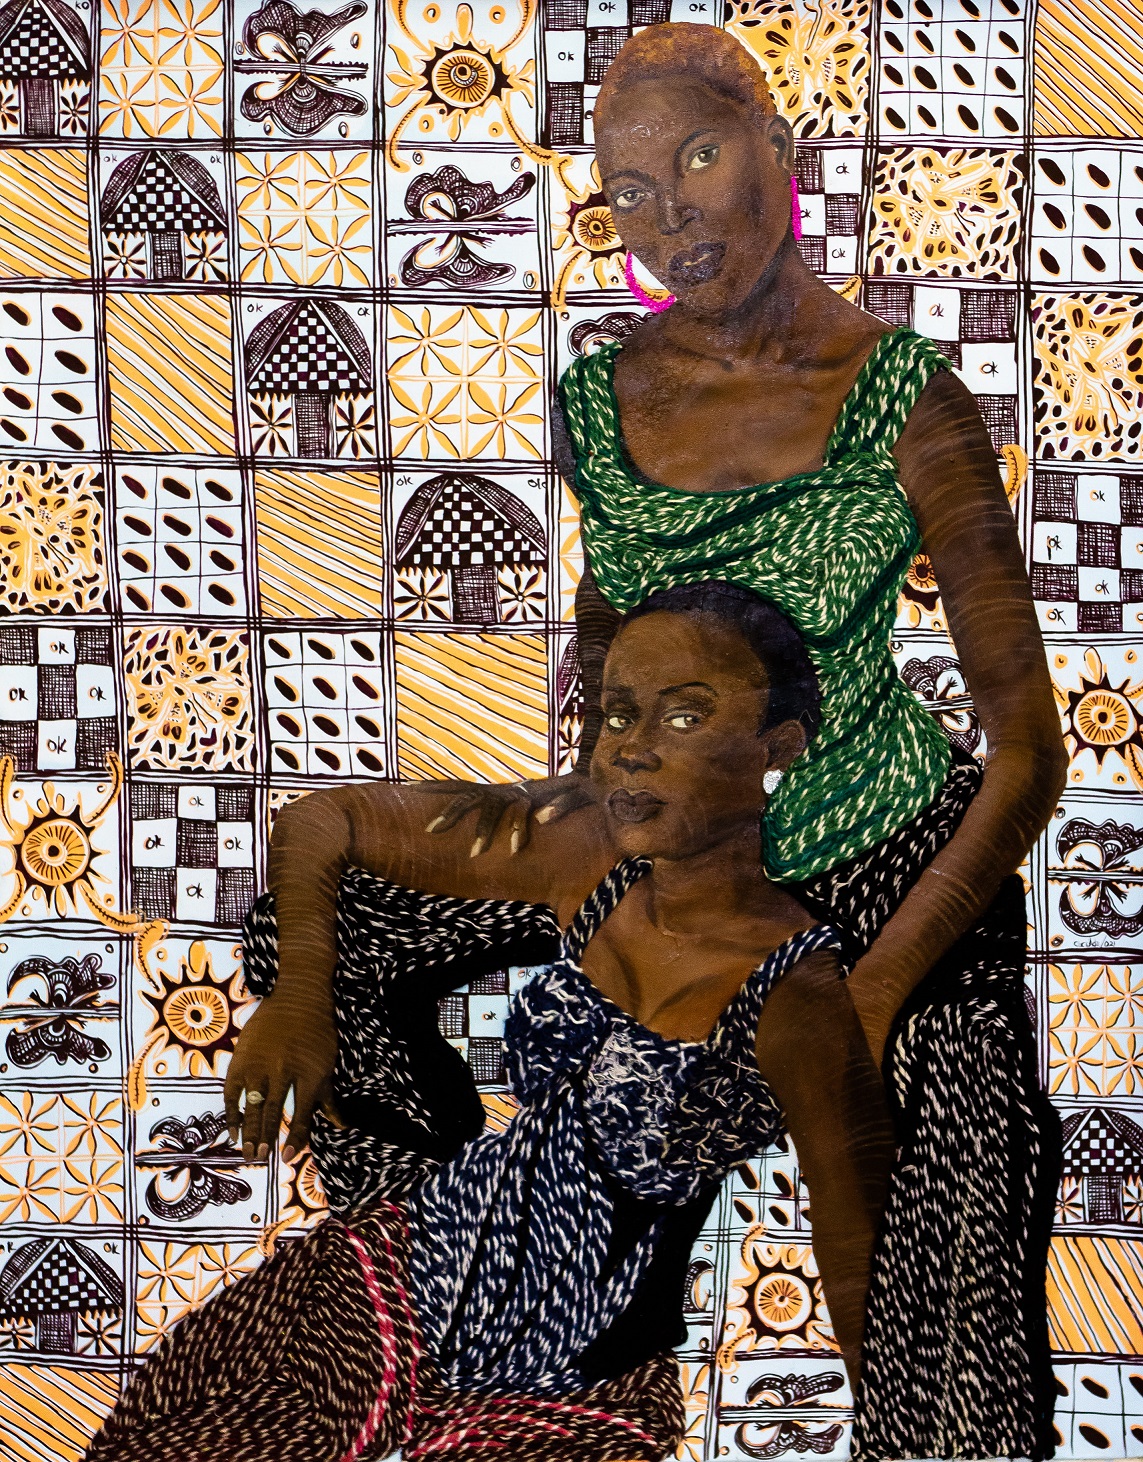 'Affection' by Cecilia Lamptey - Botchway, presented by Nubuke Foundation Gallery. Courtesy of the artist and Nubuke Foundation Gallery 